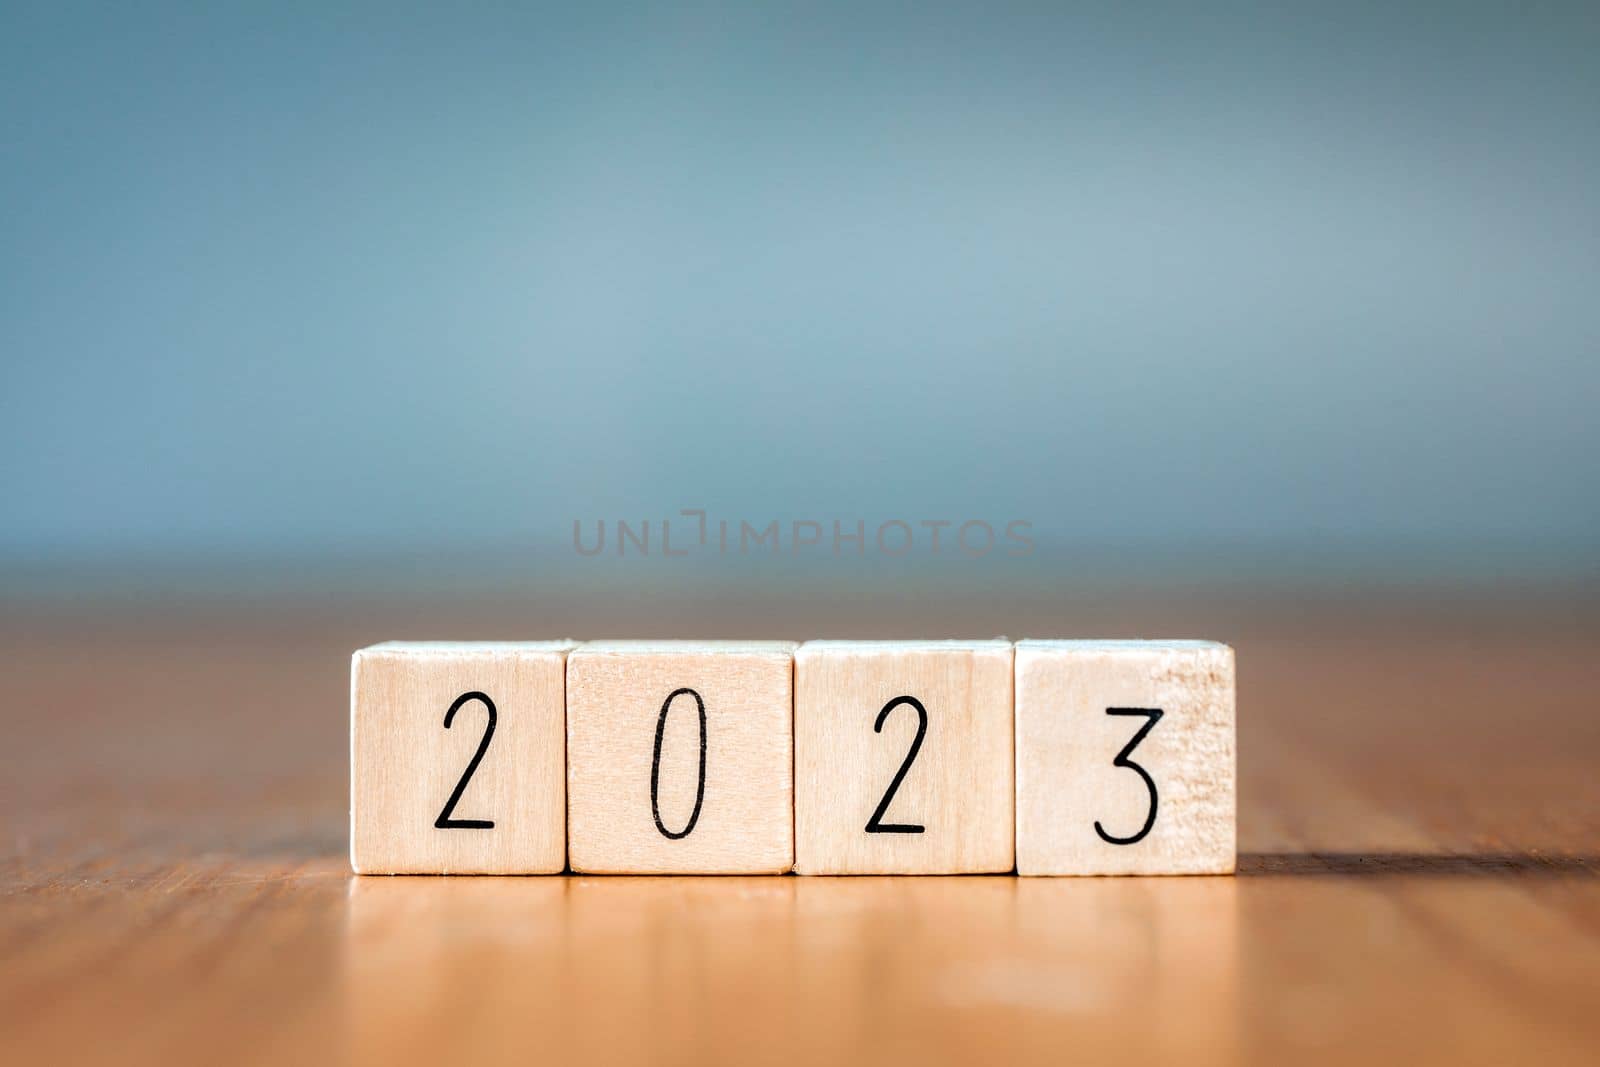 2023 New Year. wooden blocks 2023 on blue background. Start new year 2023 with goal plan, goal concept, action plan, strategy, new year business vision. copy space by Annebel146